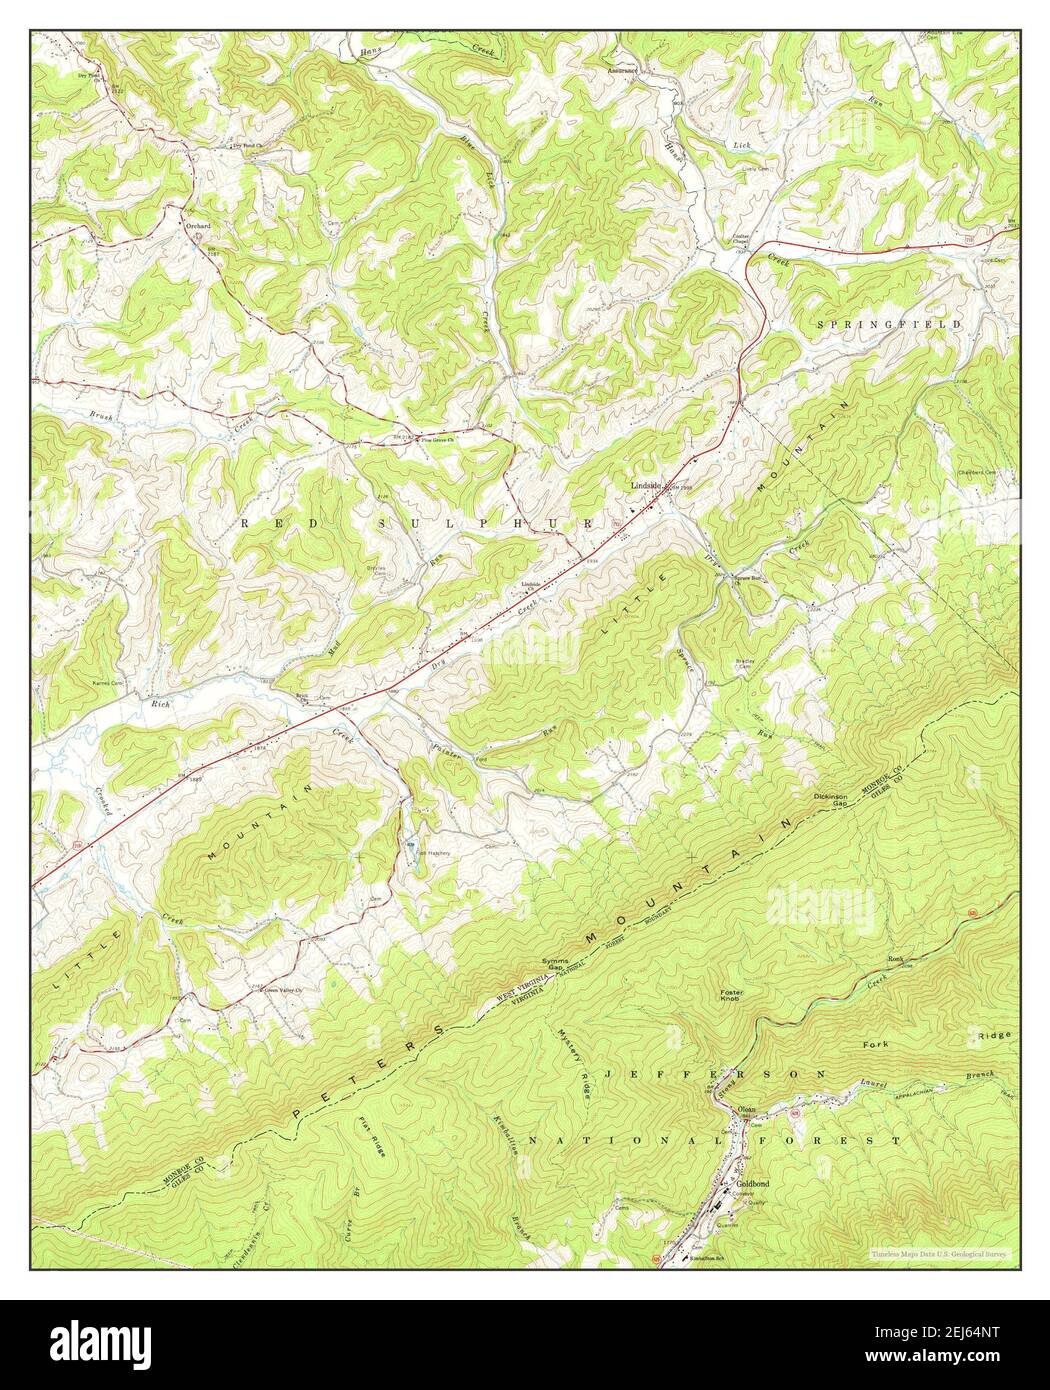 Lindside, West Virginia, map 1965, 1:24000, United States of America by Timeless Maps, data U.S. Geological Survey Stock Photo